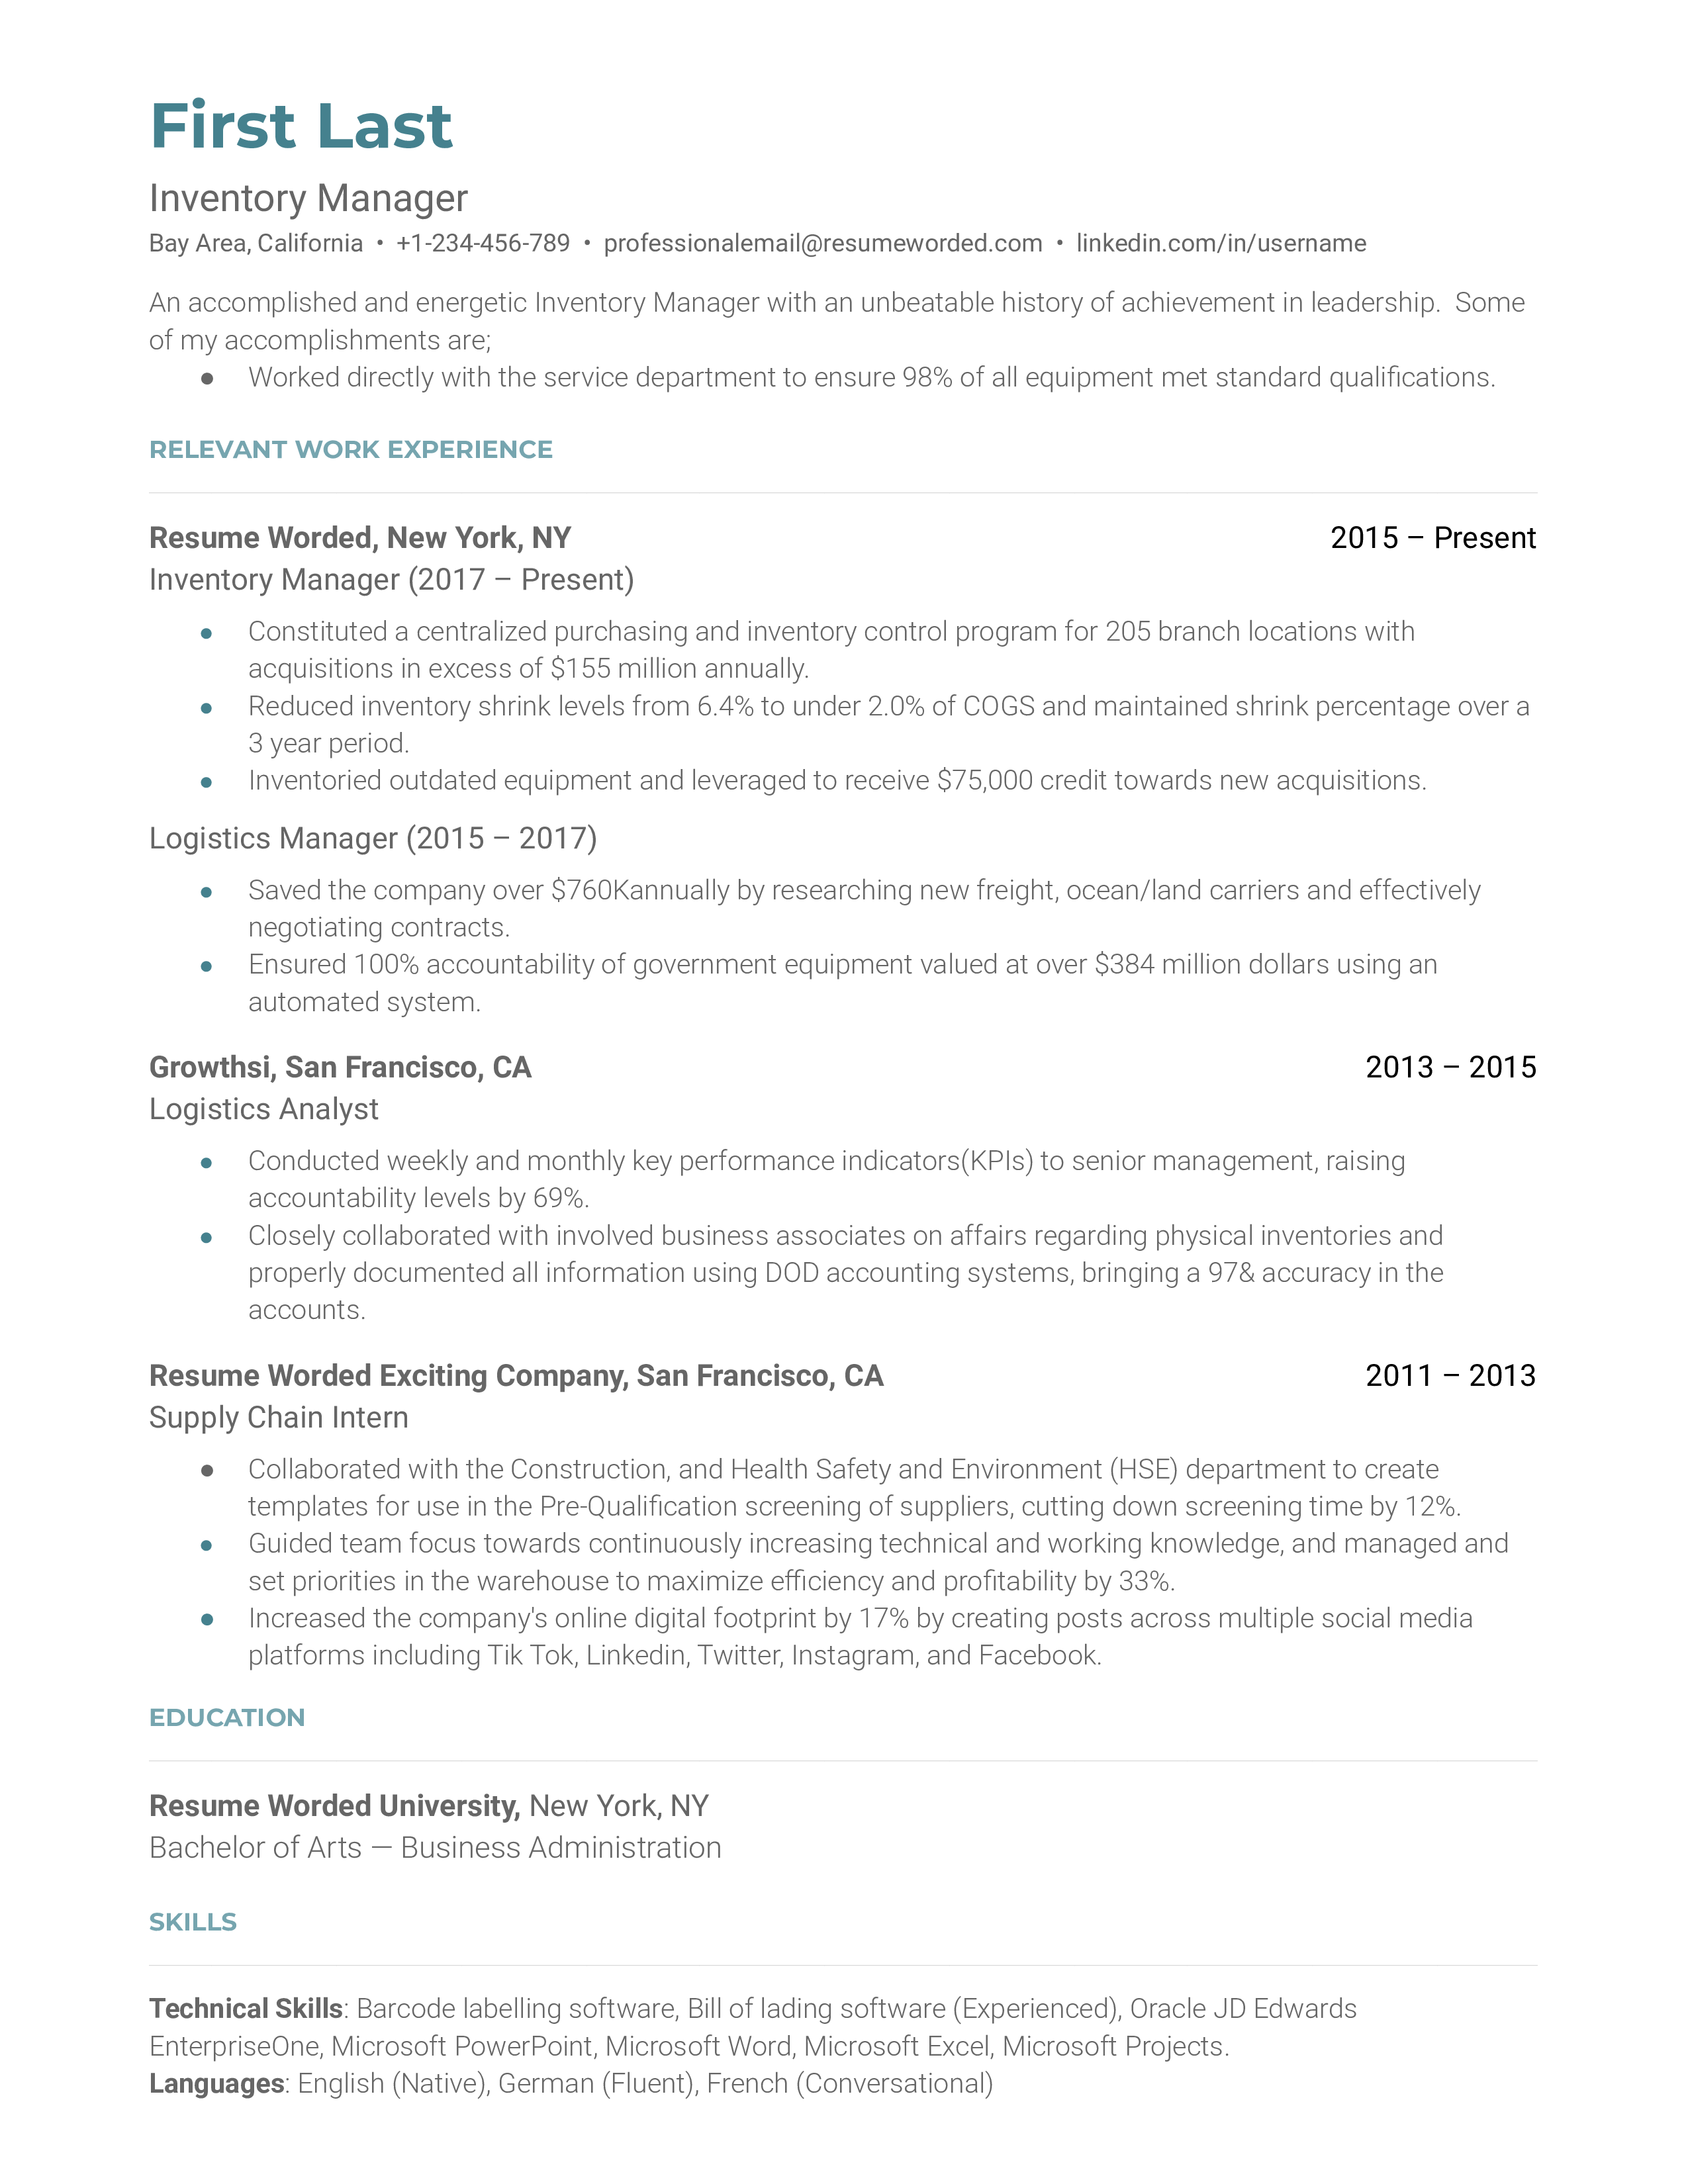 A Inventory Manager resume template showing showcasing accomplishments.